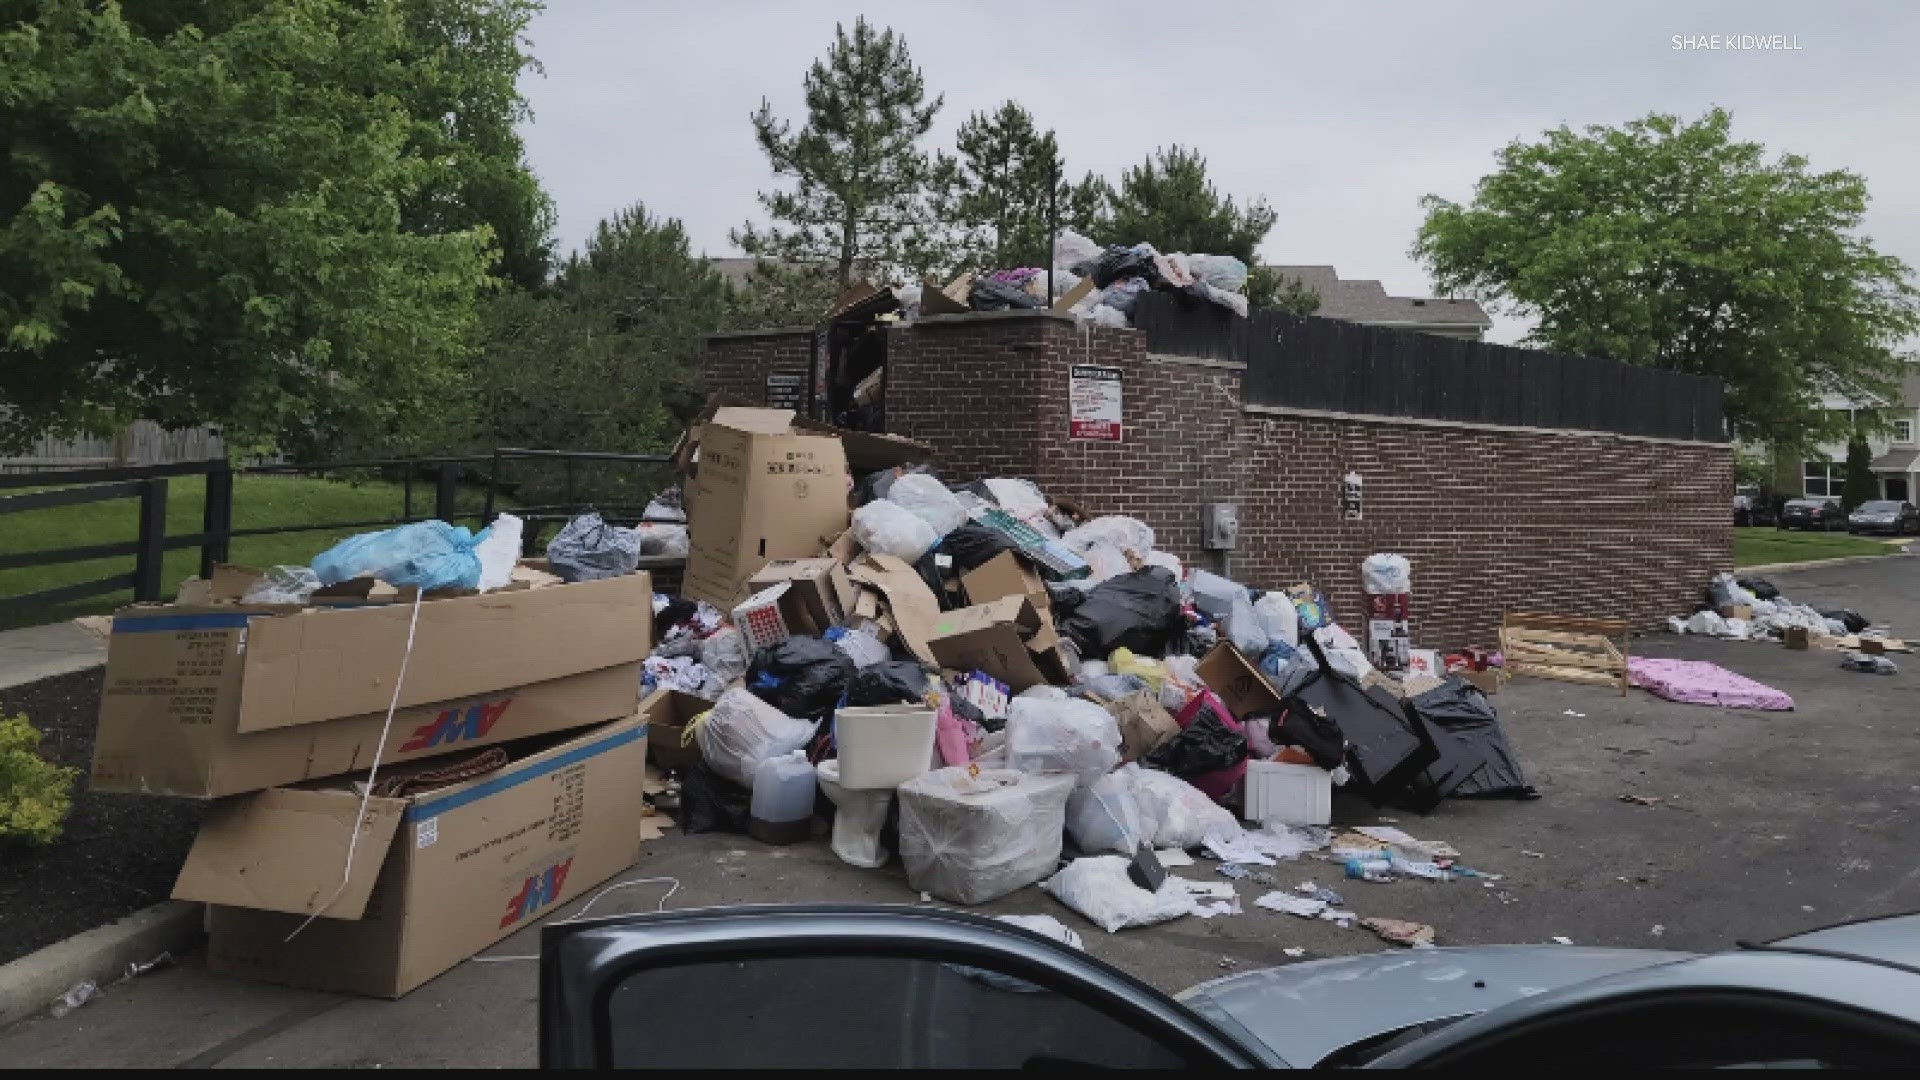 A resident shared images of a dumpster overflowing with garbage.